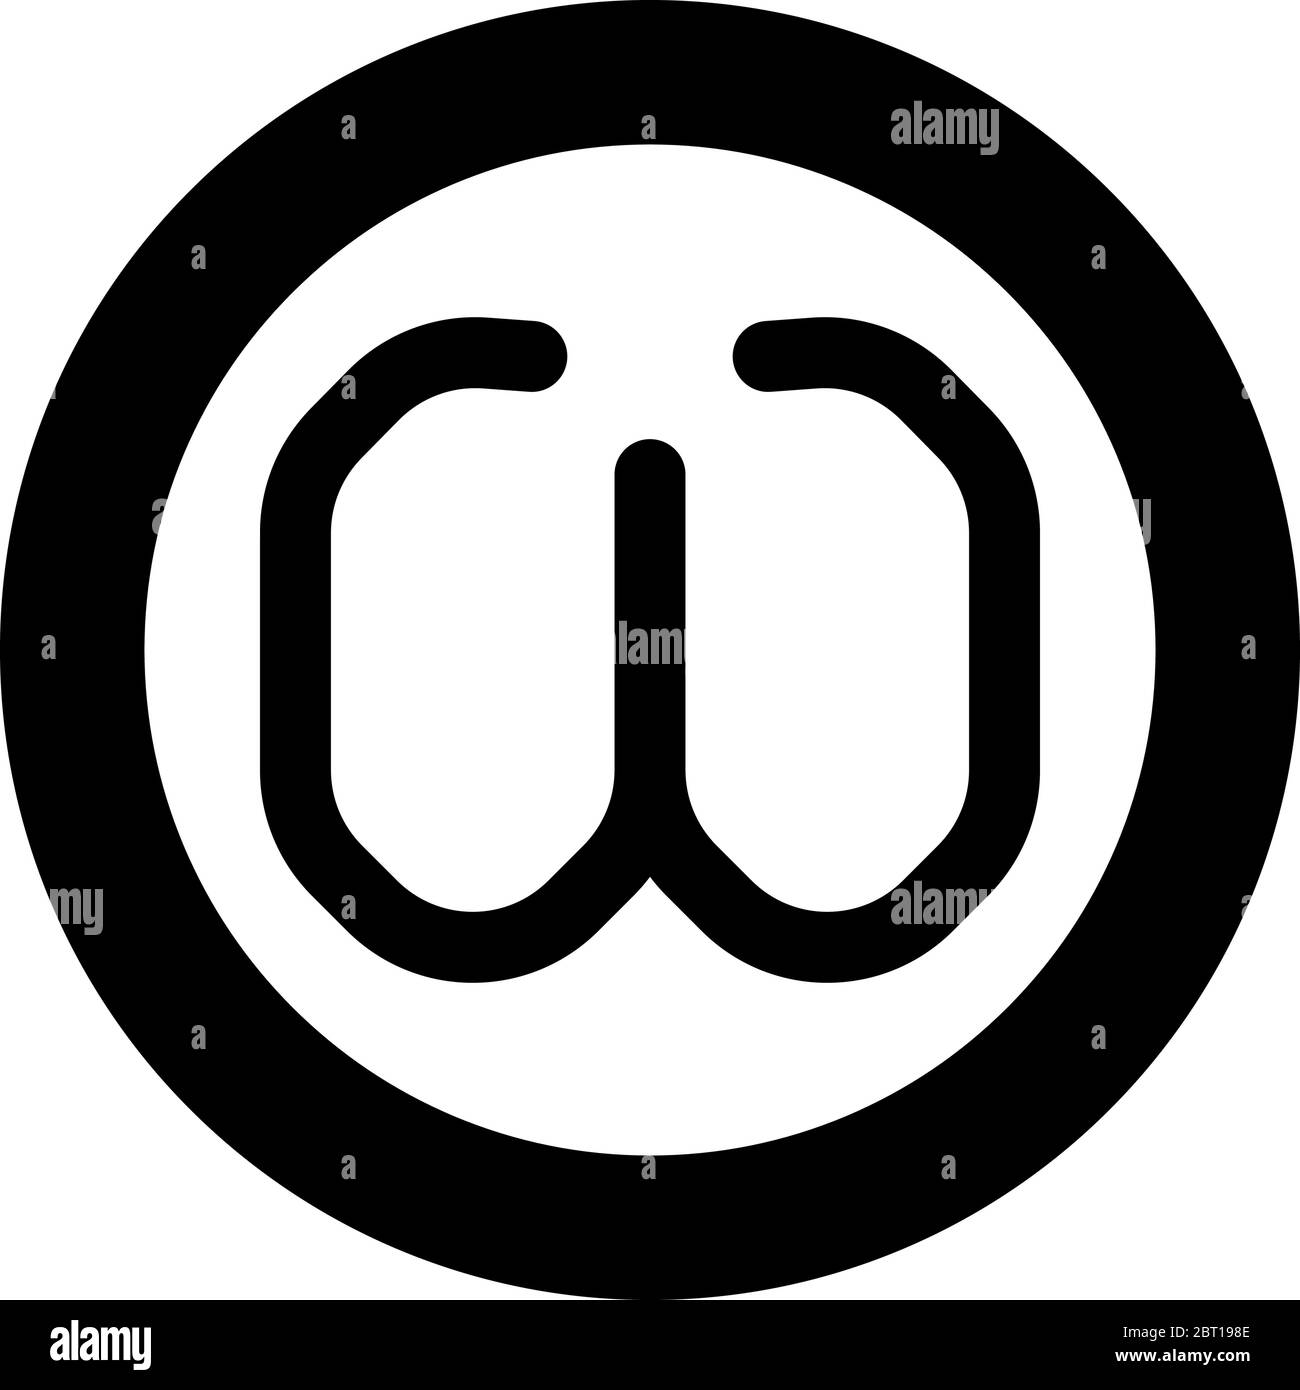 Omega greek symbol small letter lowercase font icon in circle round black color vector illustration flat style simple image Stock Vector